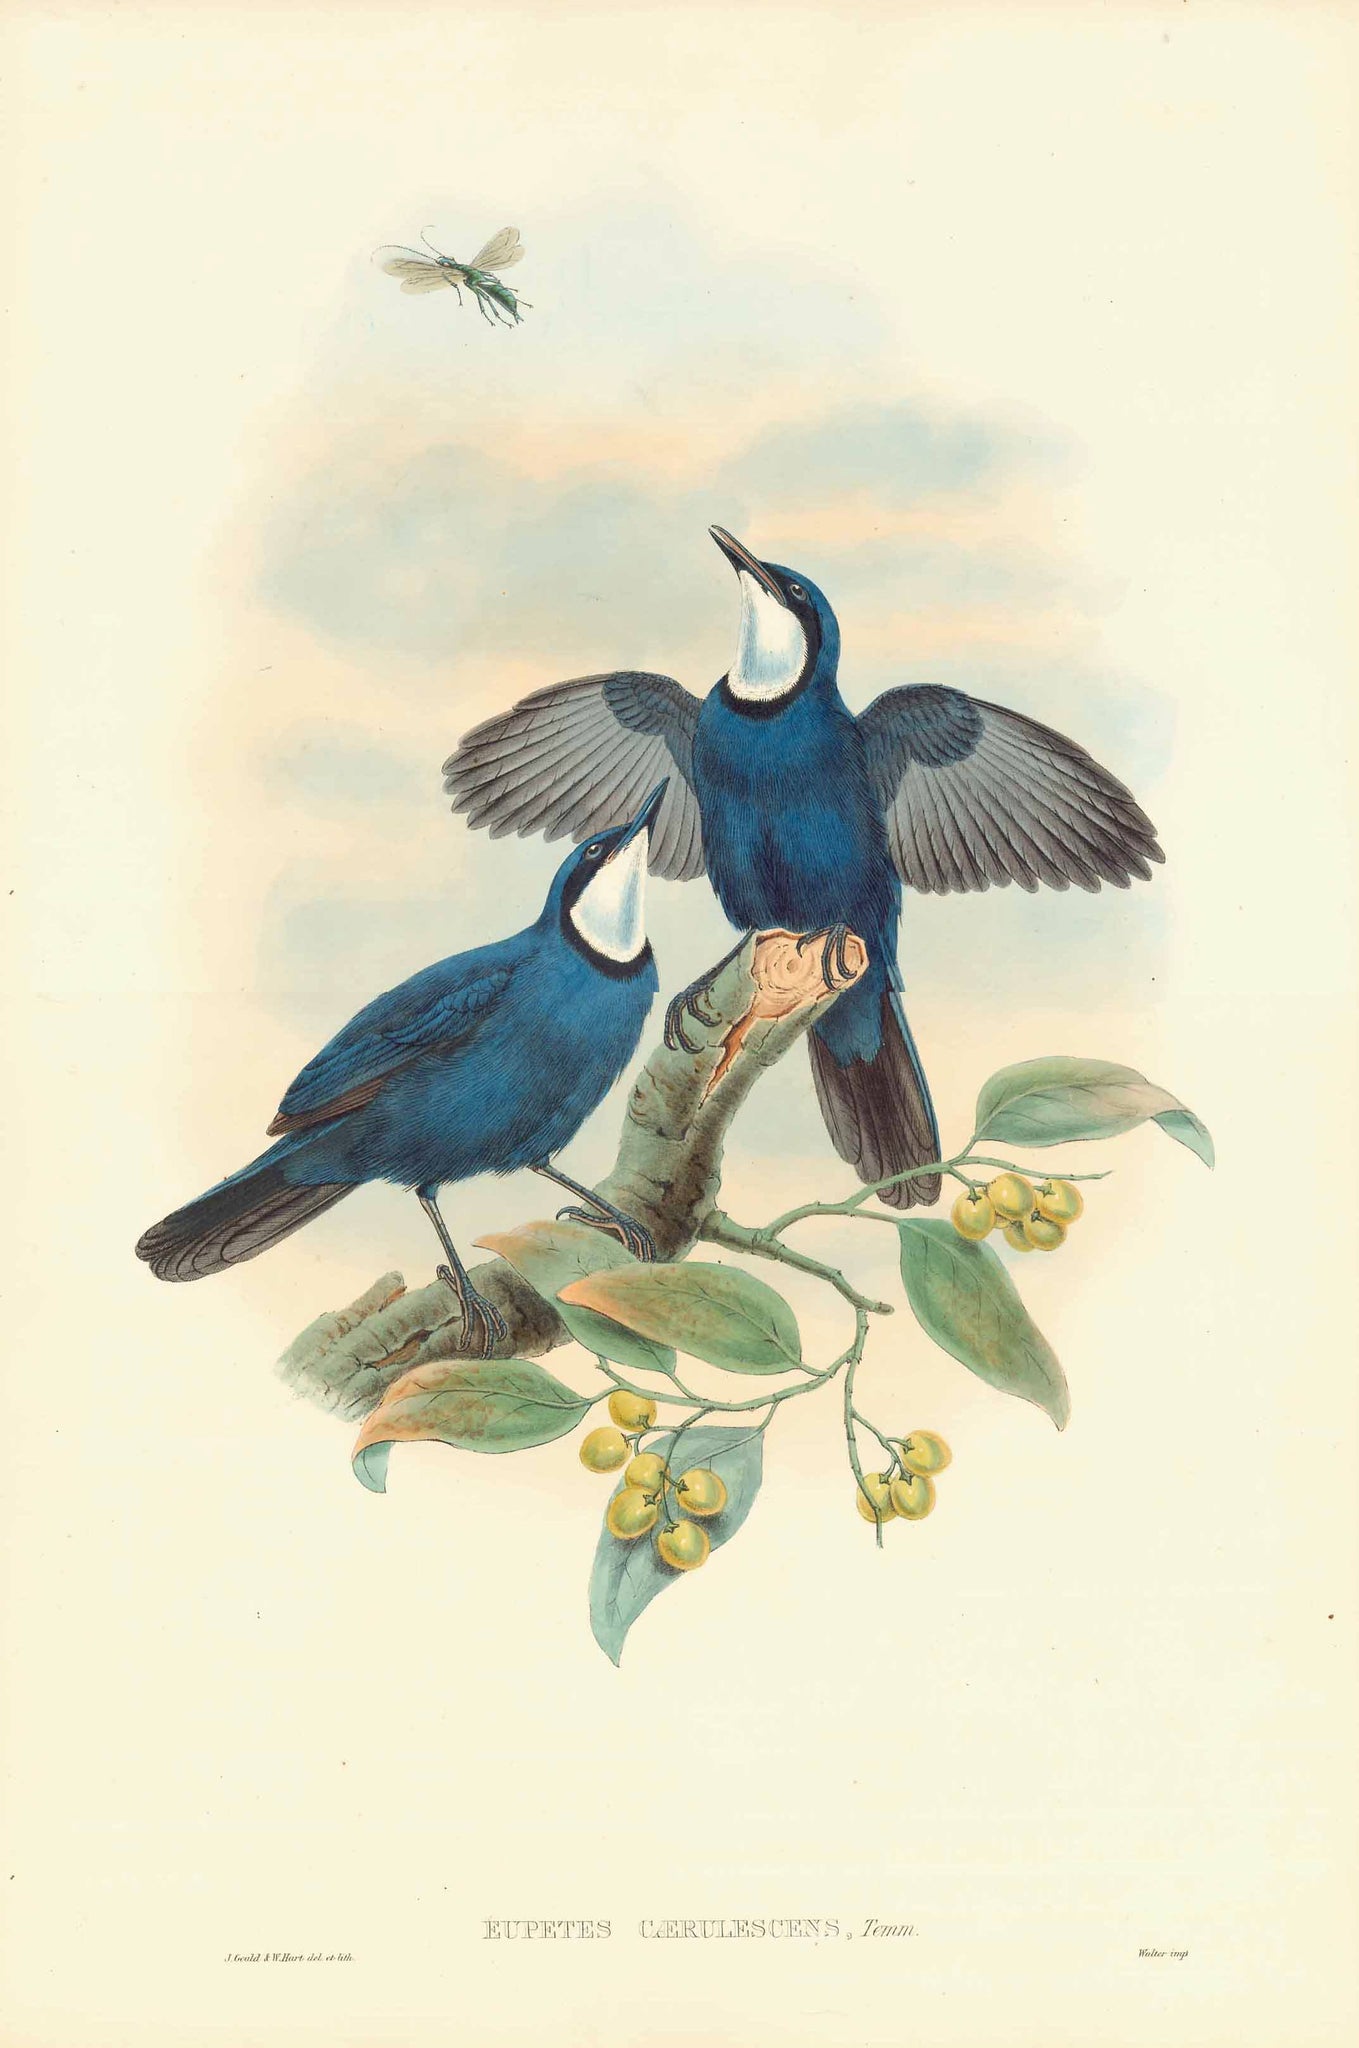 "Eupetes Caerulescens"  Blue Jewel-Babbler  Malaysia, Sumatra, Borneo  Lithograph with original hand coloring. By John Gould and W. Hart  Published in "Birds of Asia", by John Gould (1804-1881) in 7 volumes  London, 1850-1883  Sheet measurement: 55 x 37 cm (ca. 21.7 x 14.5")  Very good condition.  Original antique print  